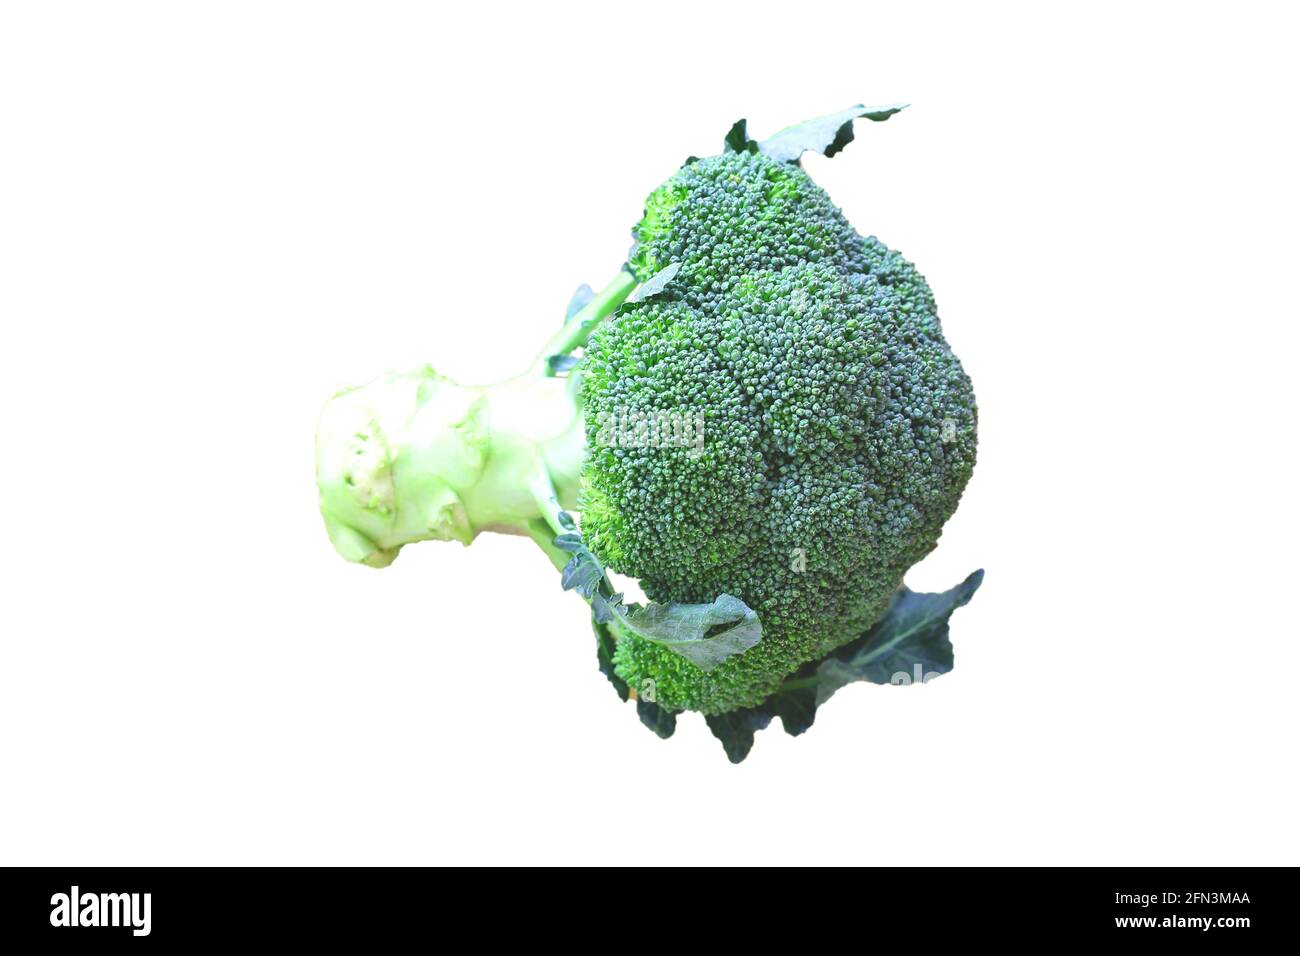 broccoli isolated on white background for use as an image resource. Stock Photo